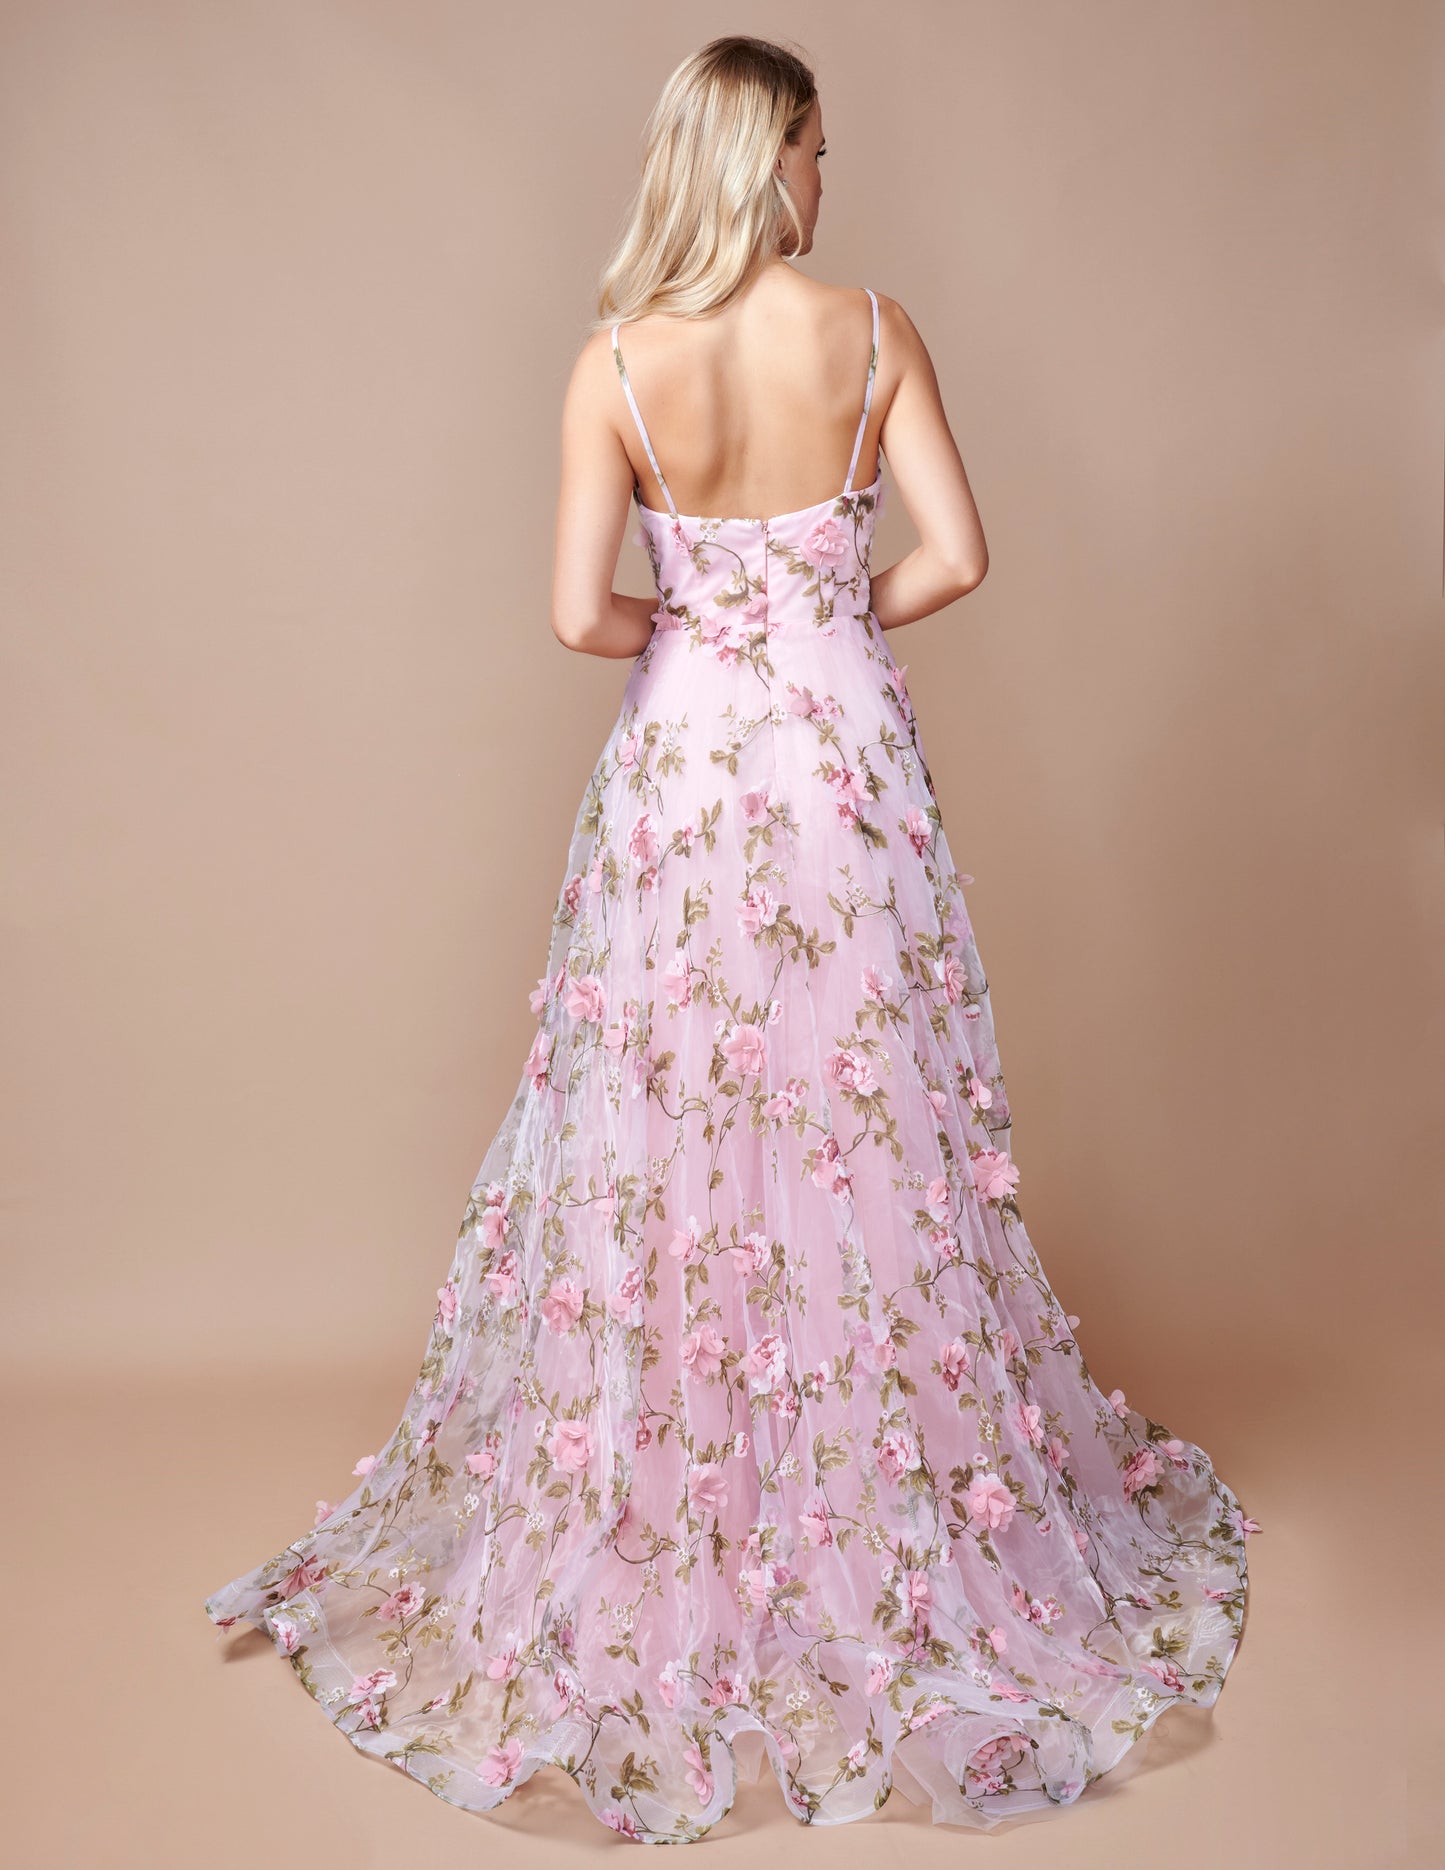 Expertly designed for a sophisticated look, the Nina Canacci 9150 Maxi Dress is the perfect choice for prom or any formal event. This stunning A-line gown features a floral print, 3D detailing, and a V-neckline that will flatter any figure. With a dramatic slit, you'll make a statement as you dance the night away.